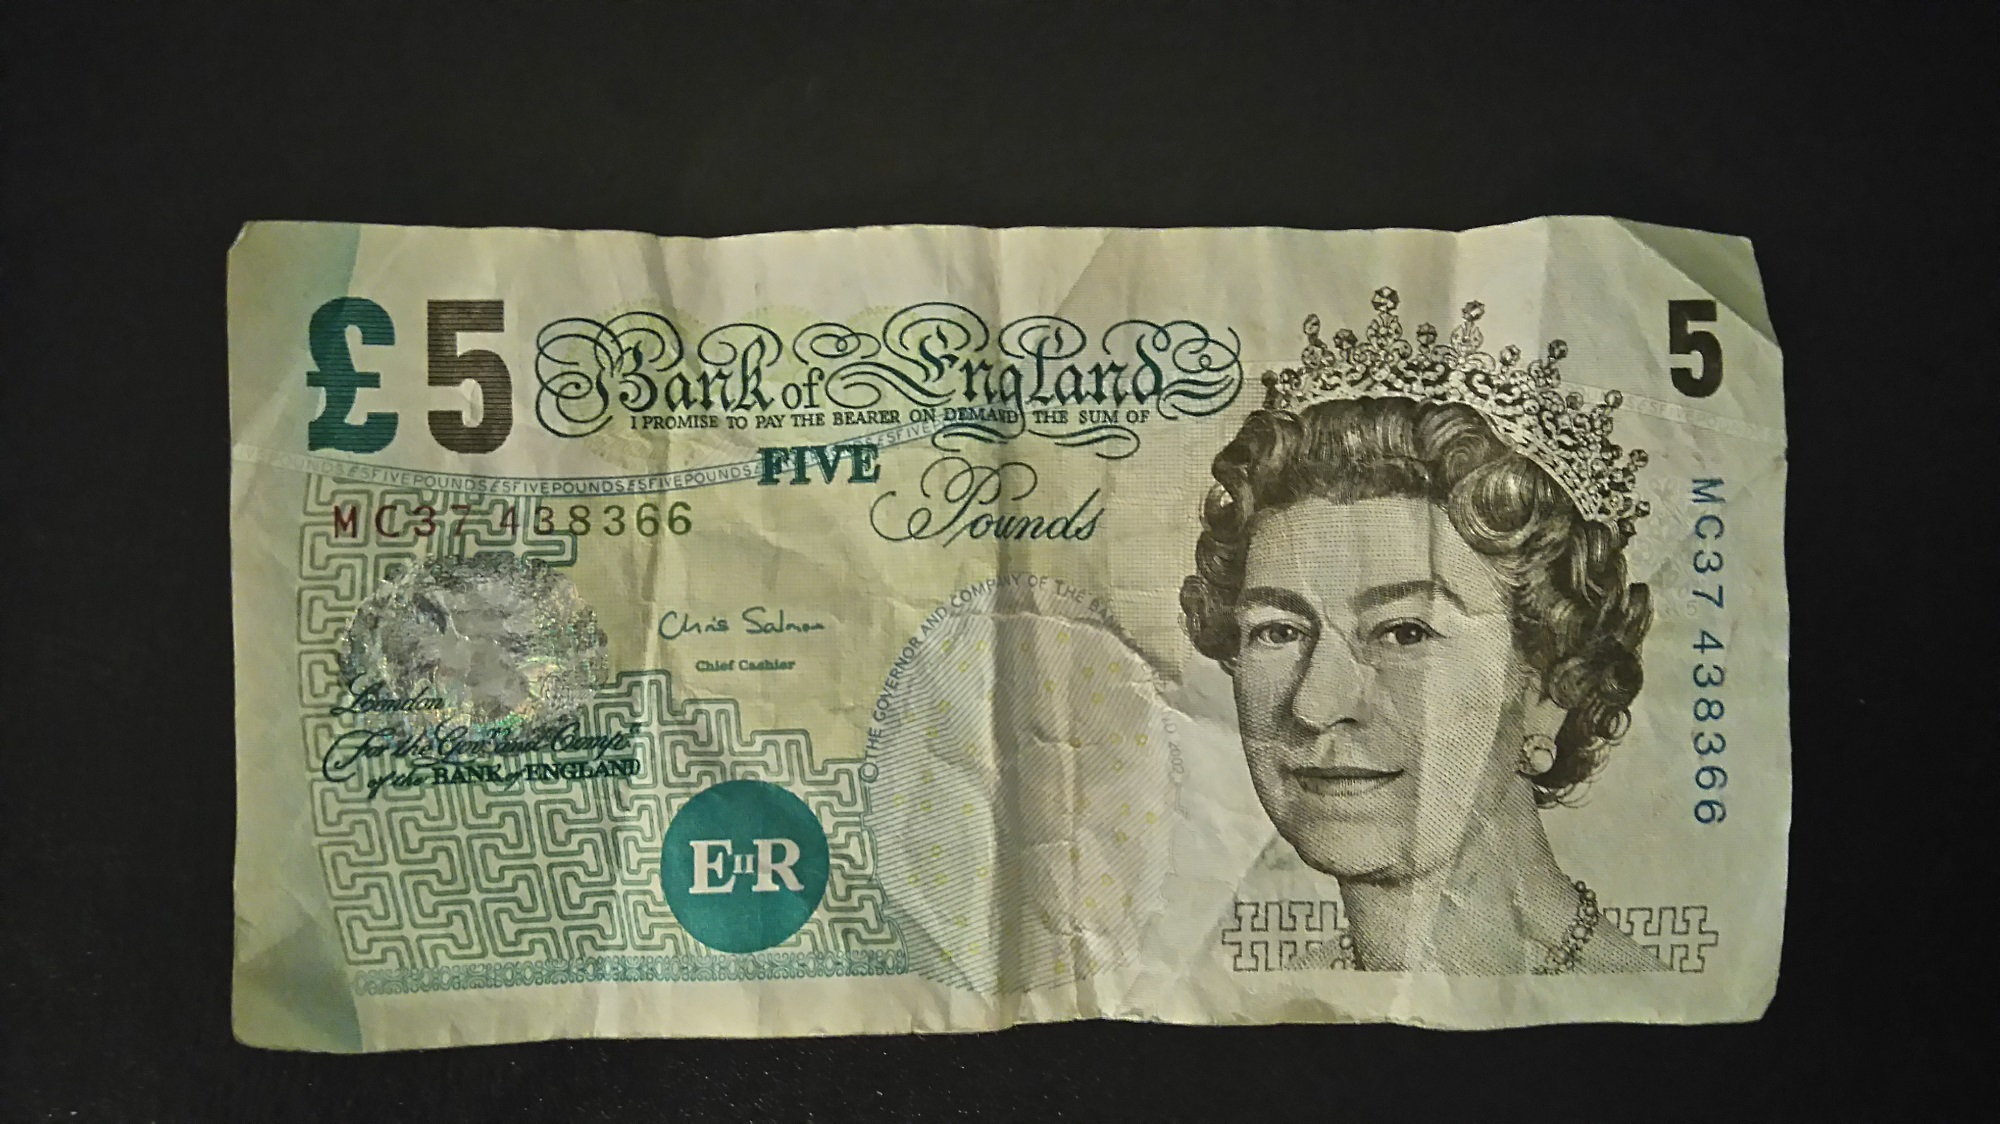 An old Bank of England Five Pound Note viewed from the front.